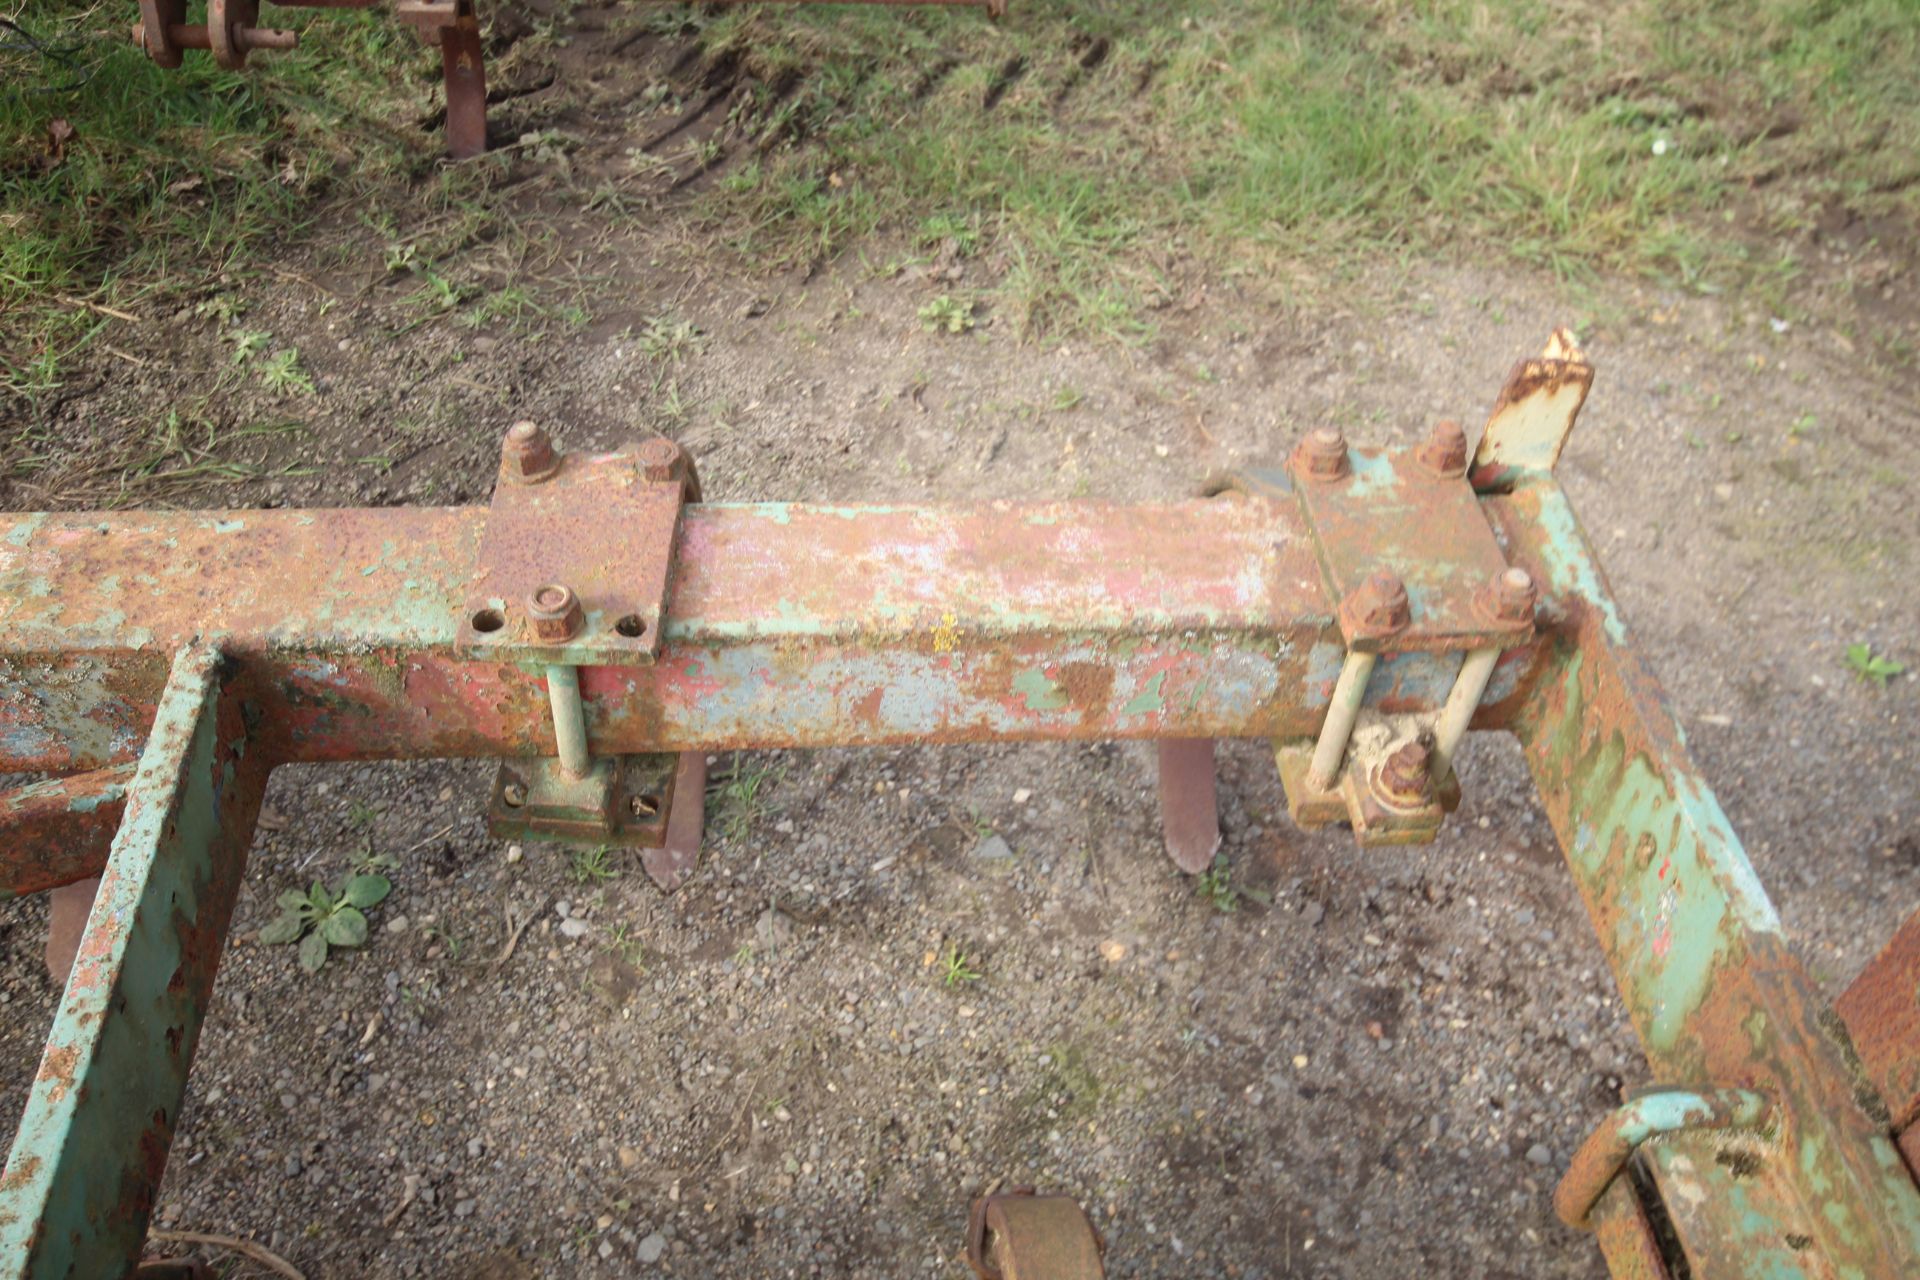 4m sprung tine cultivator. - Image 6 of 15